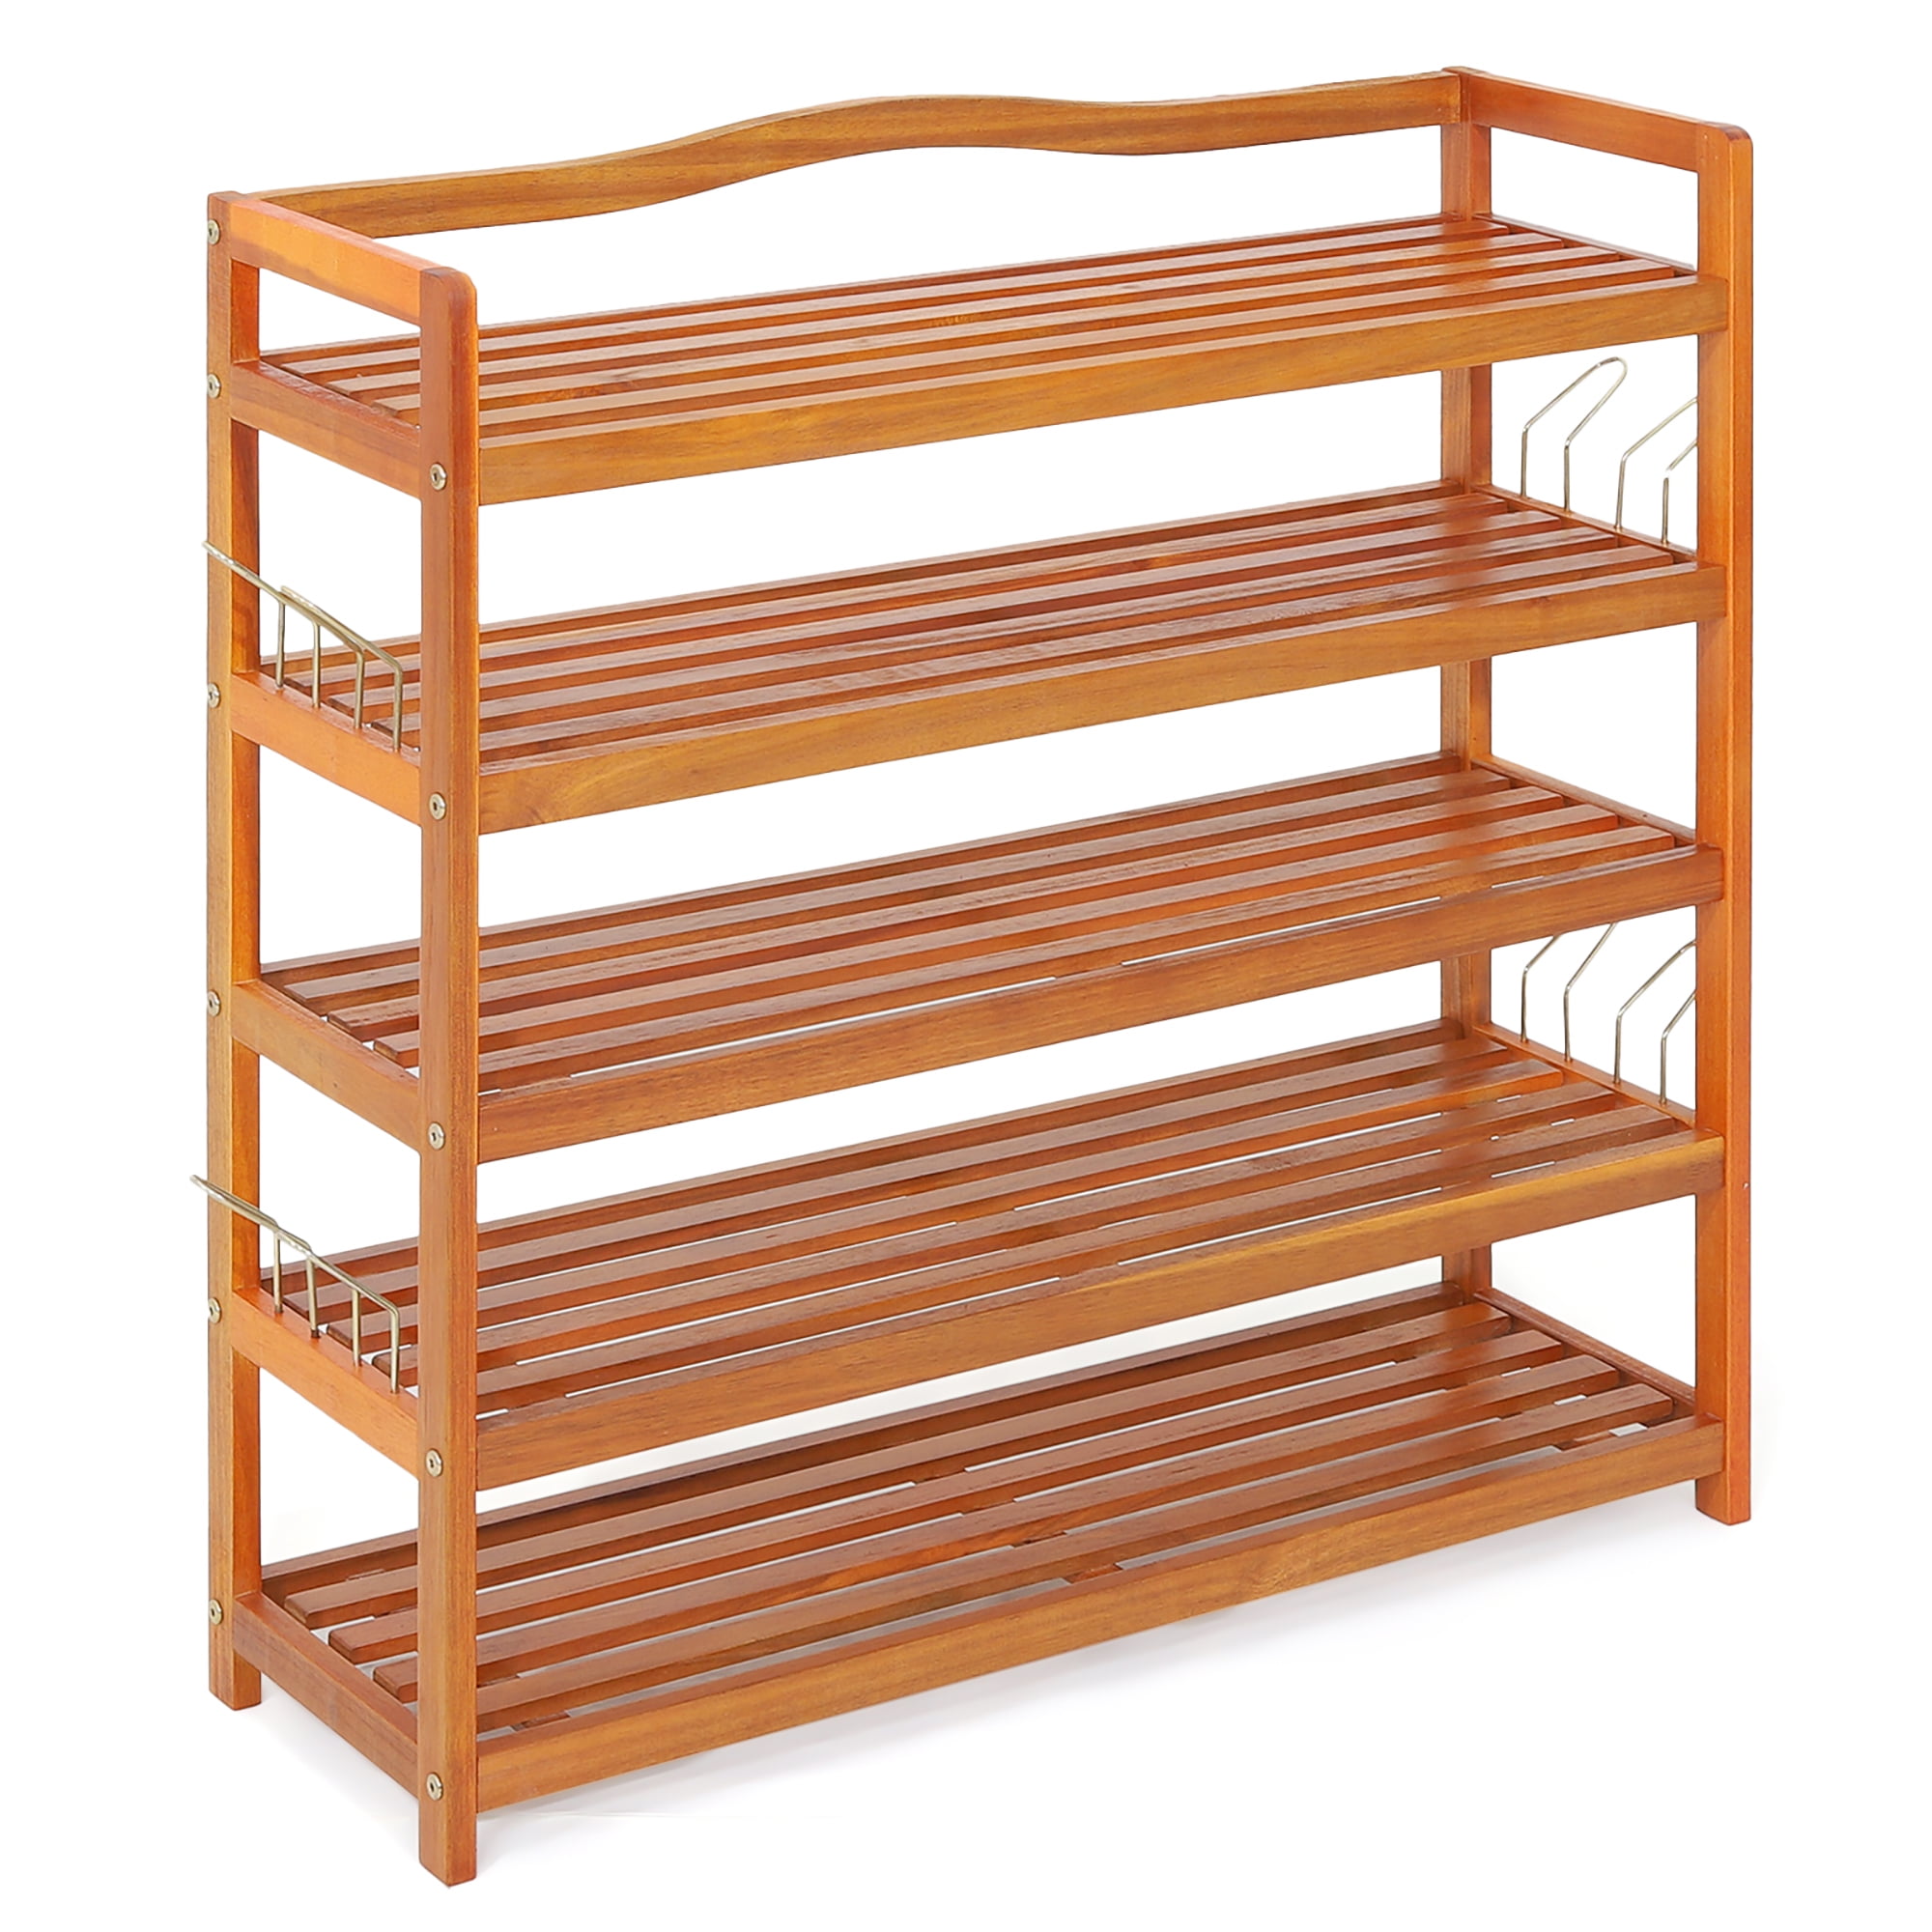 2 or 4 Tier Natural Woodens Shelf Storage Shoe Rack Stand 